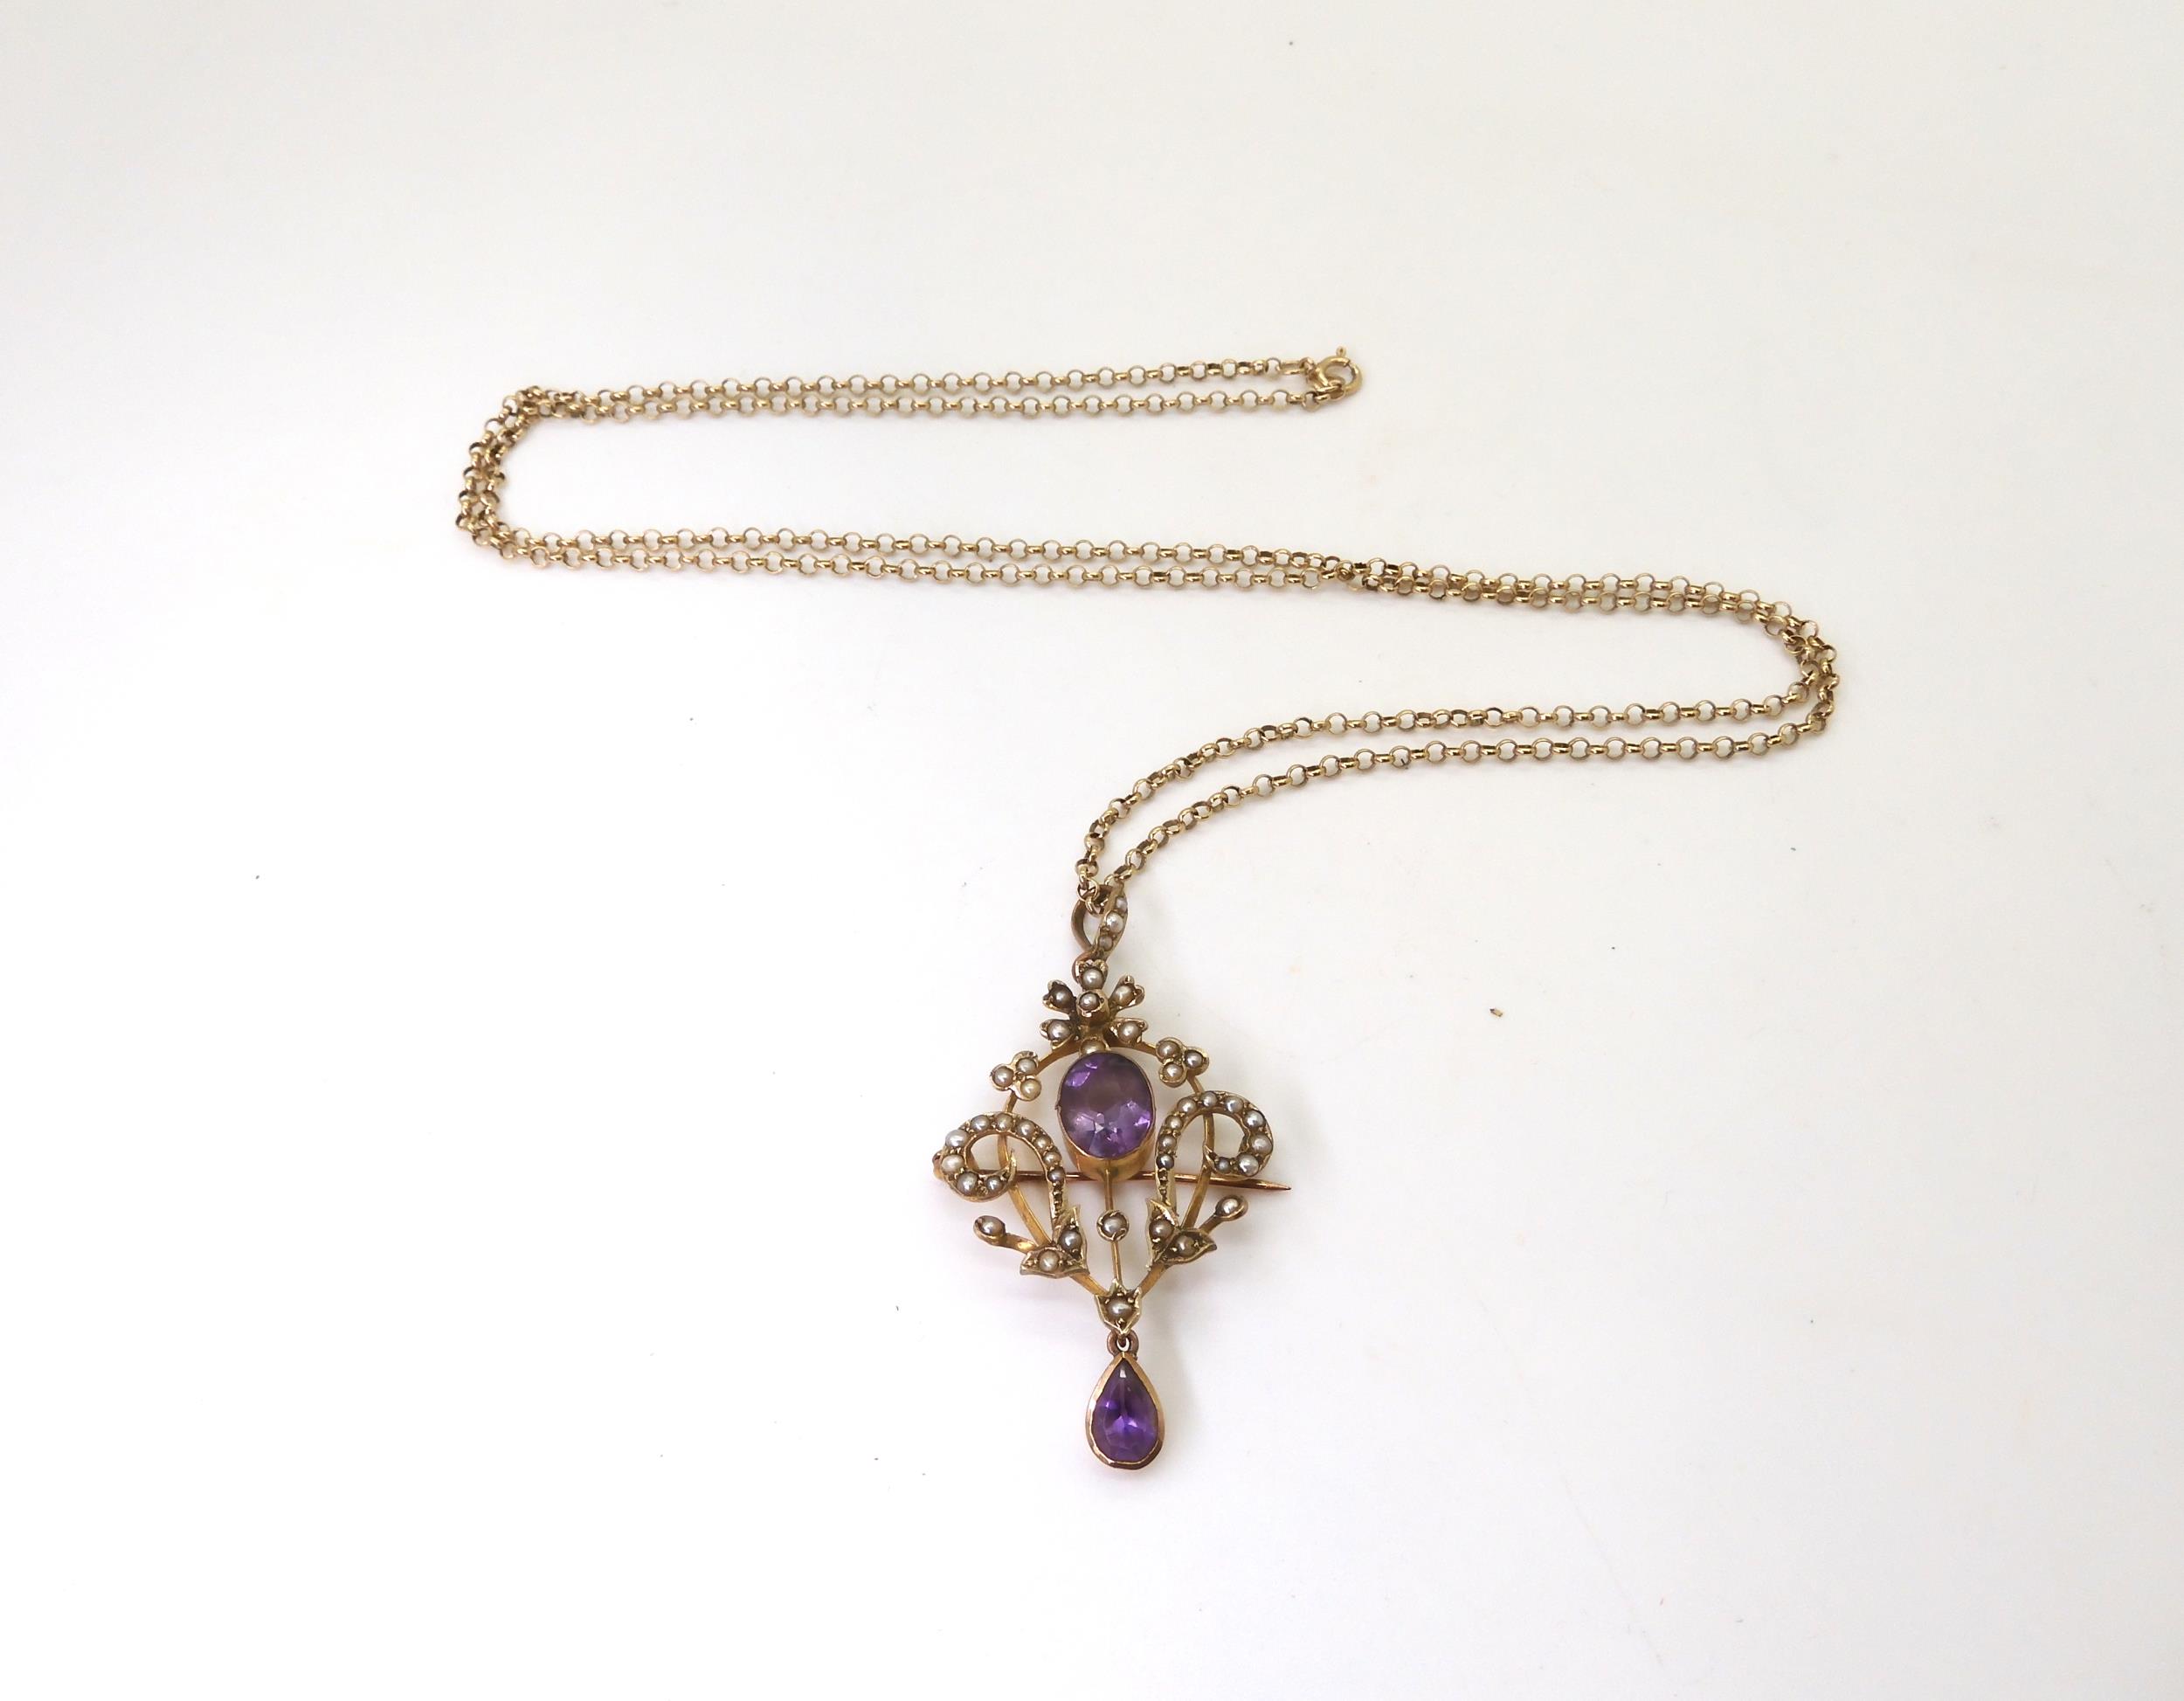 A 9ct gold Edwardian amethyst and pearl pendant brooch on a long 66cm 9ct gold belcher chain, weight